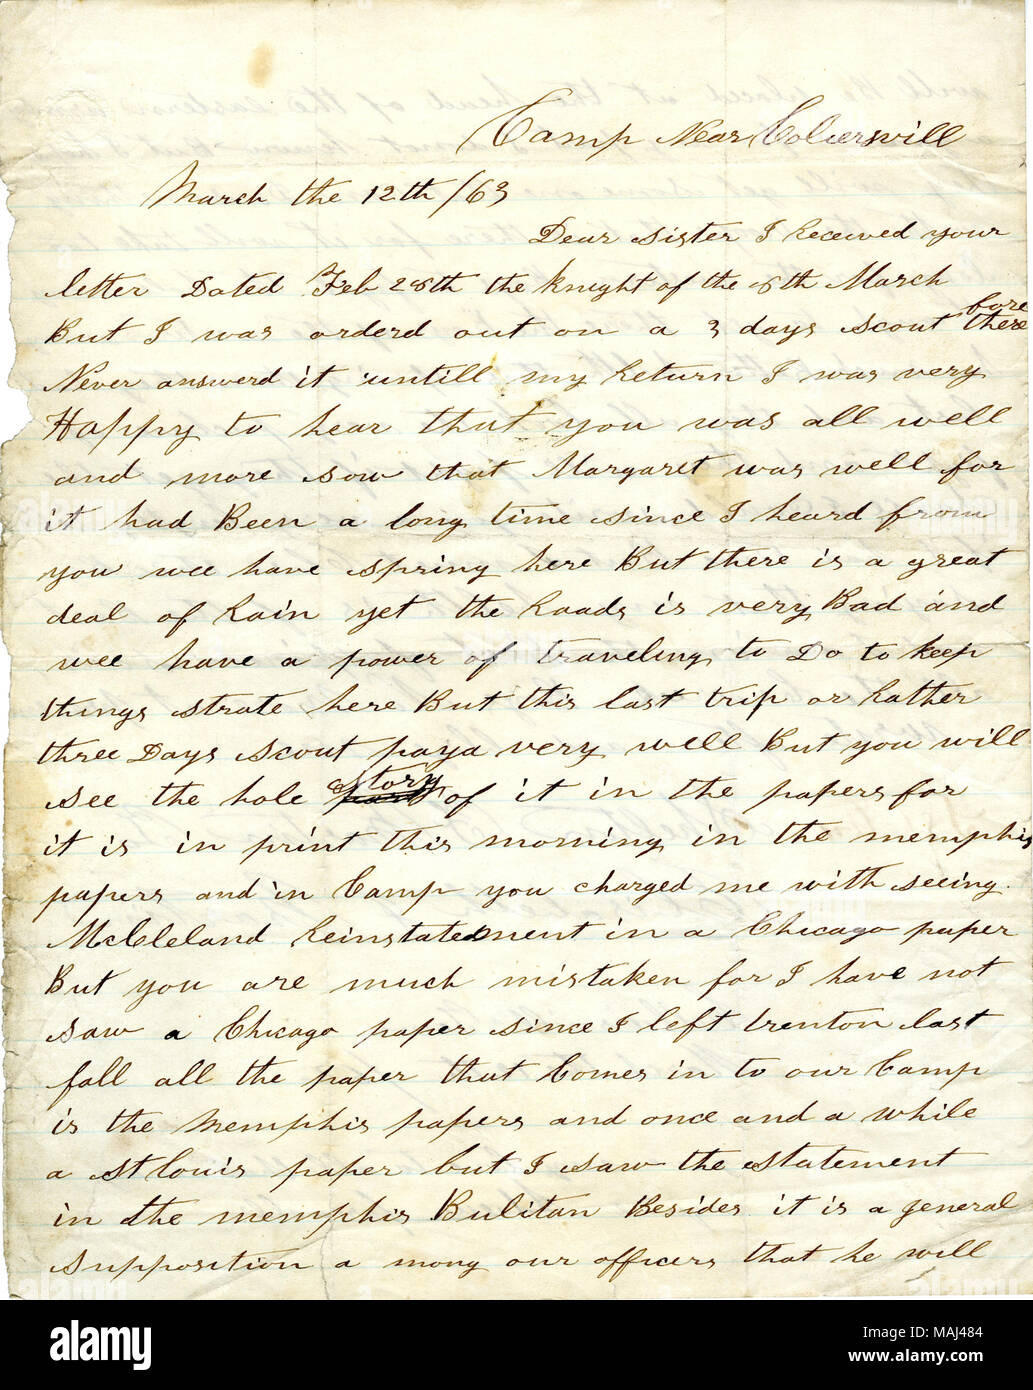 Mentions news about McClellan's reinstatement.  Transcription: Camp Near Coliersvill[Collierville] March the 12th / 63 Dear Sister I Received your letter Dated Feb 28th the knight of the 8th March But I was orderd out on a 3 days Scout therefore Never answered it untill my Return I was very Happy to hear that you was all well and more sow that Margaret was well for it had Been a long time since I heard from you wee have spring here But there is a great deal of Rain yet the Roads is very Bad and wee have a power of traveling to Do to keep things strate here But this last trip or Rather three Da Stock Photo